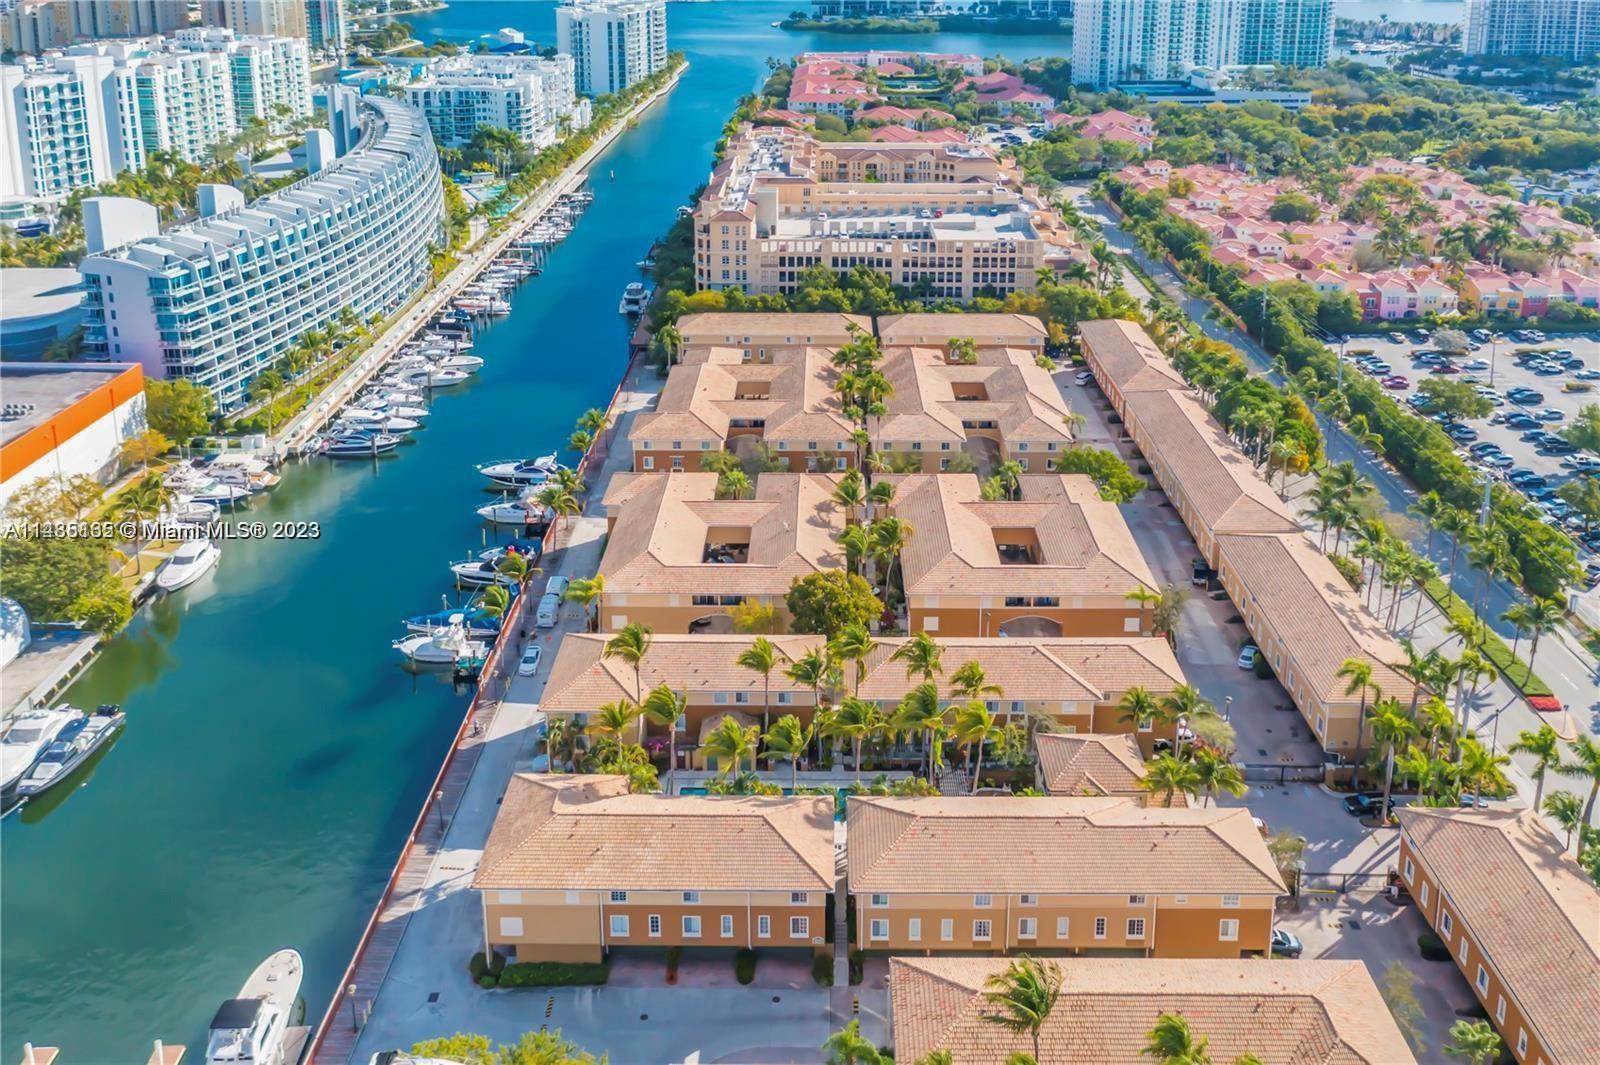 Amazing 3/2 Townhome in the Heart of Aventura with a 2 Car Garage. Class A schools and close proximity to everything Aventura has to offer. Minutes from Sunny Isles Beach and easy access to Miami and Ft. Lauderdale.